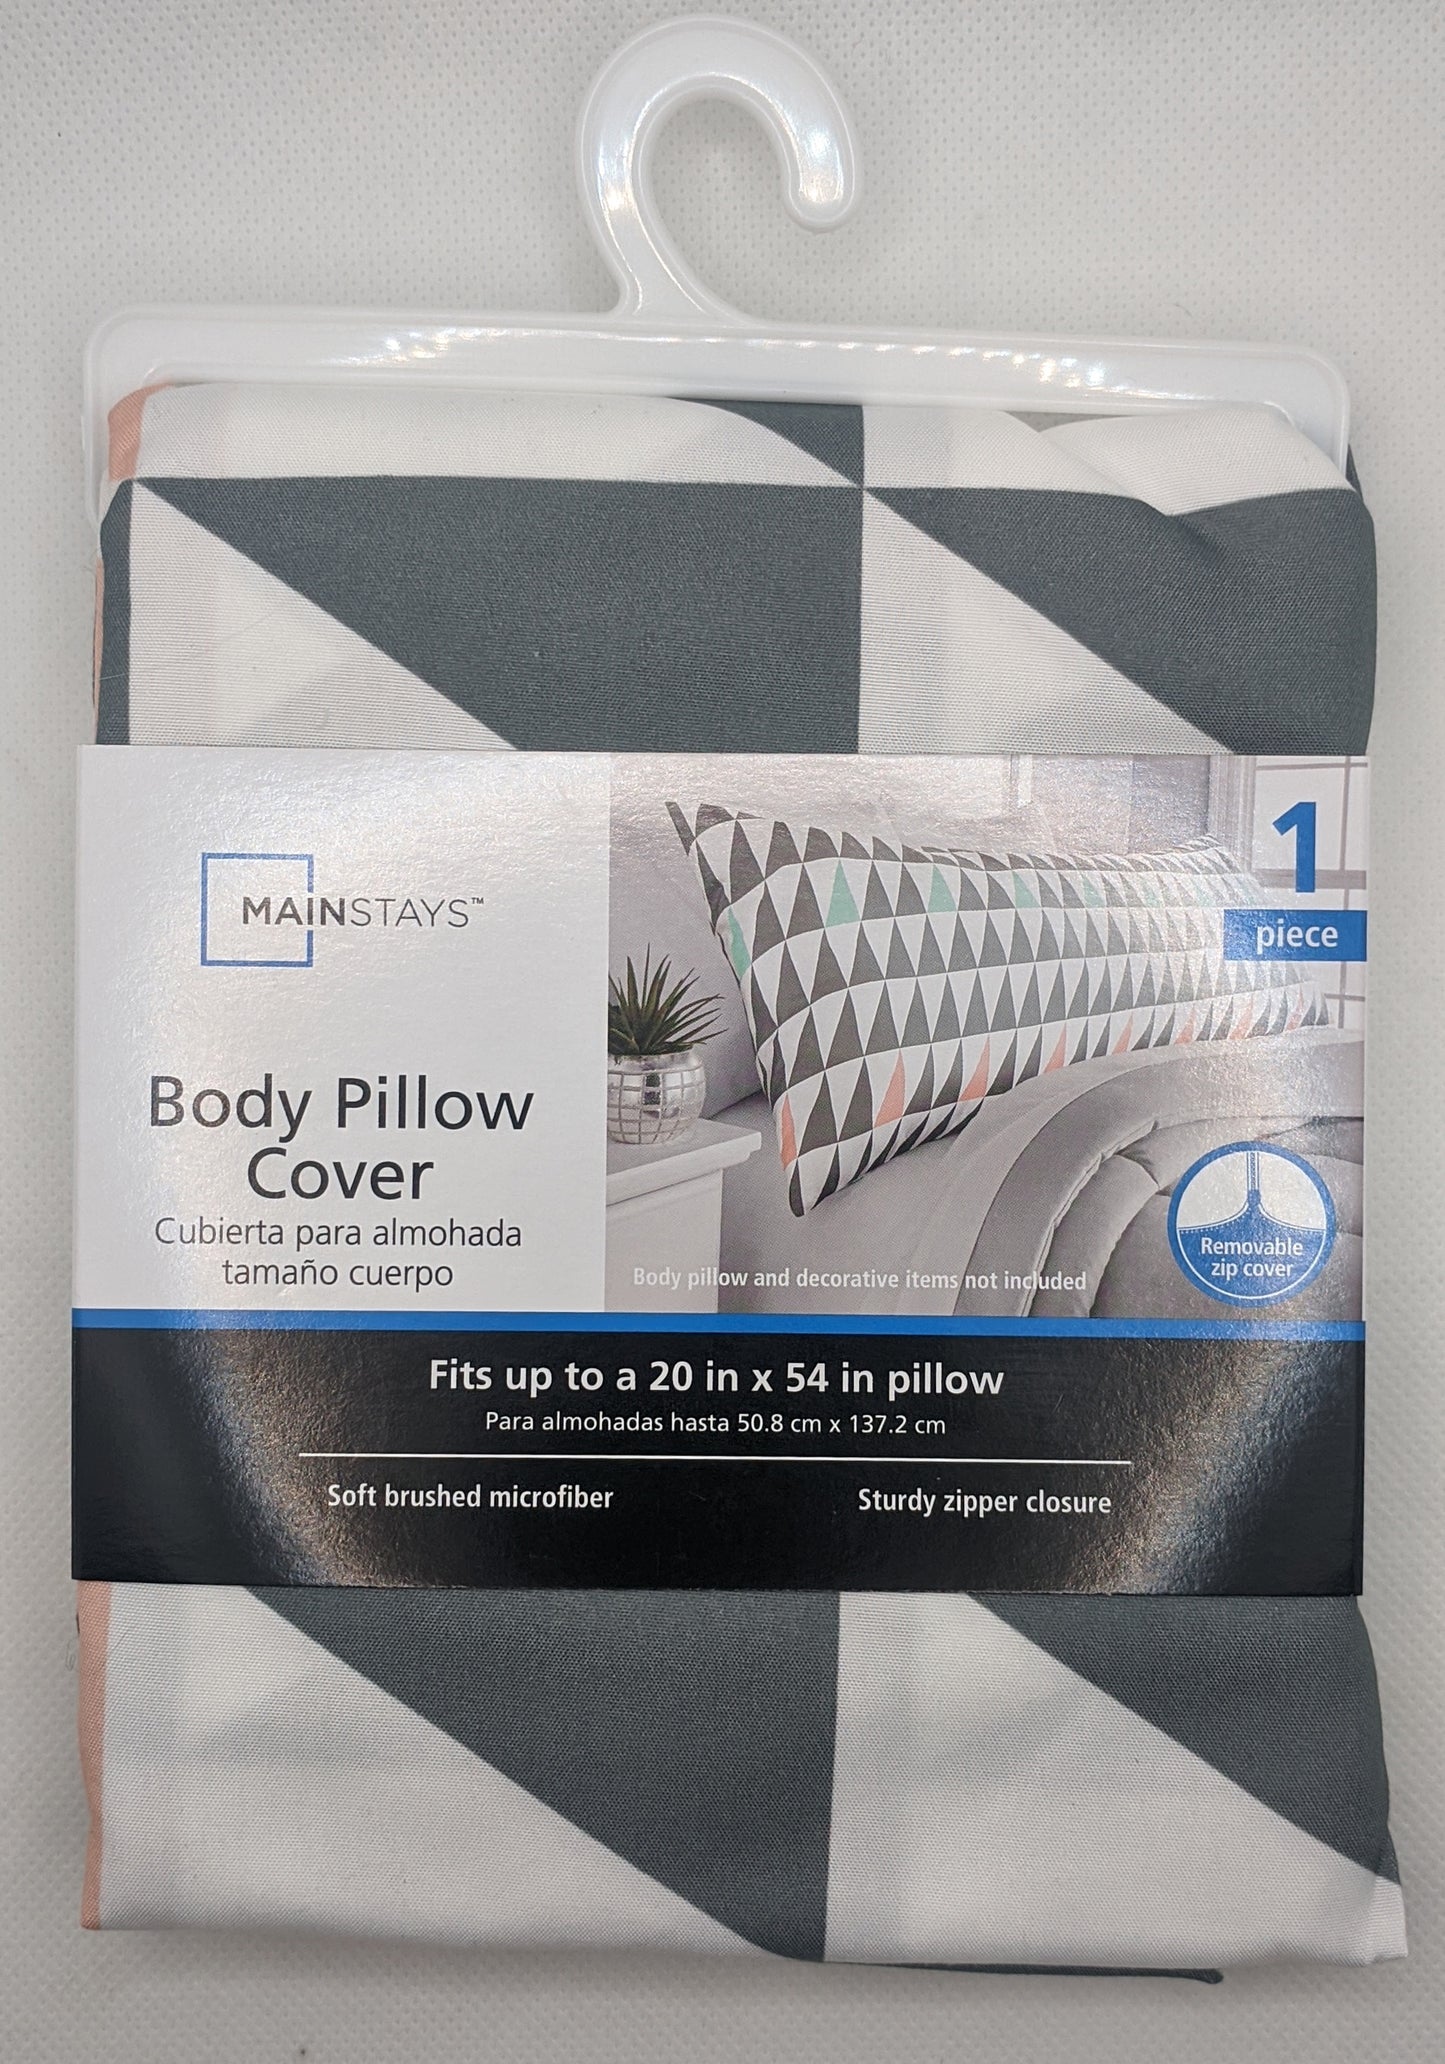 Body Pillow Cover - Mainstays - 20x54 Zippered Closure